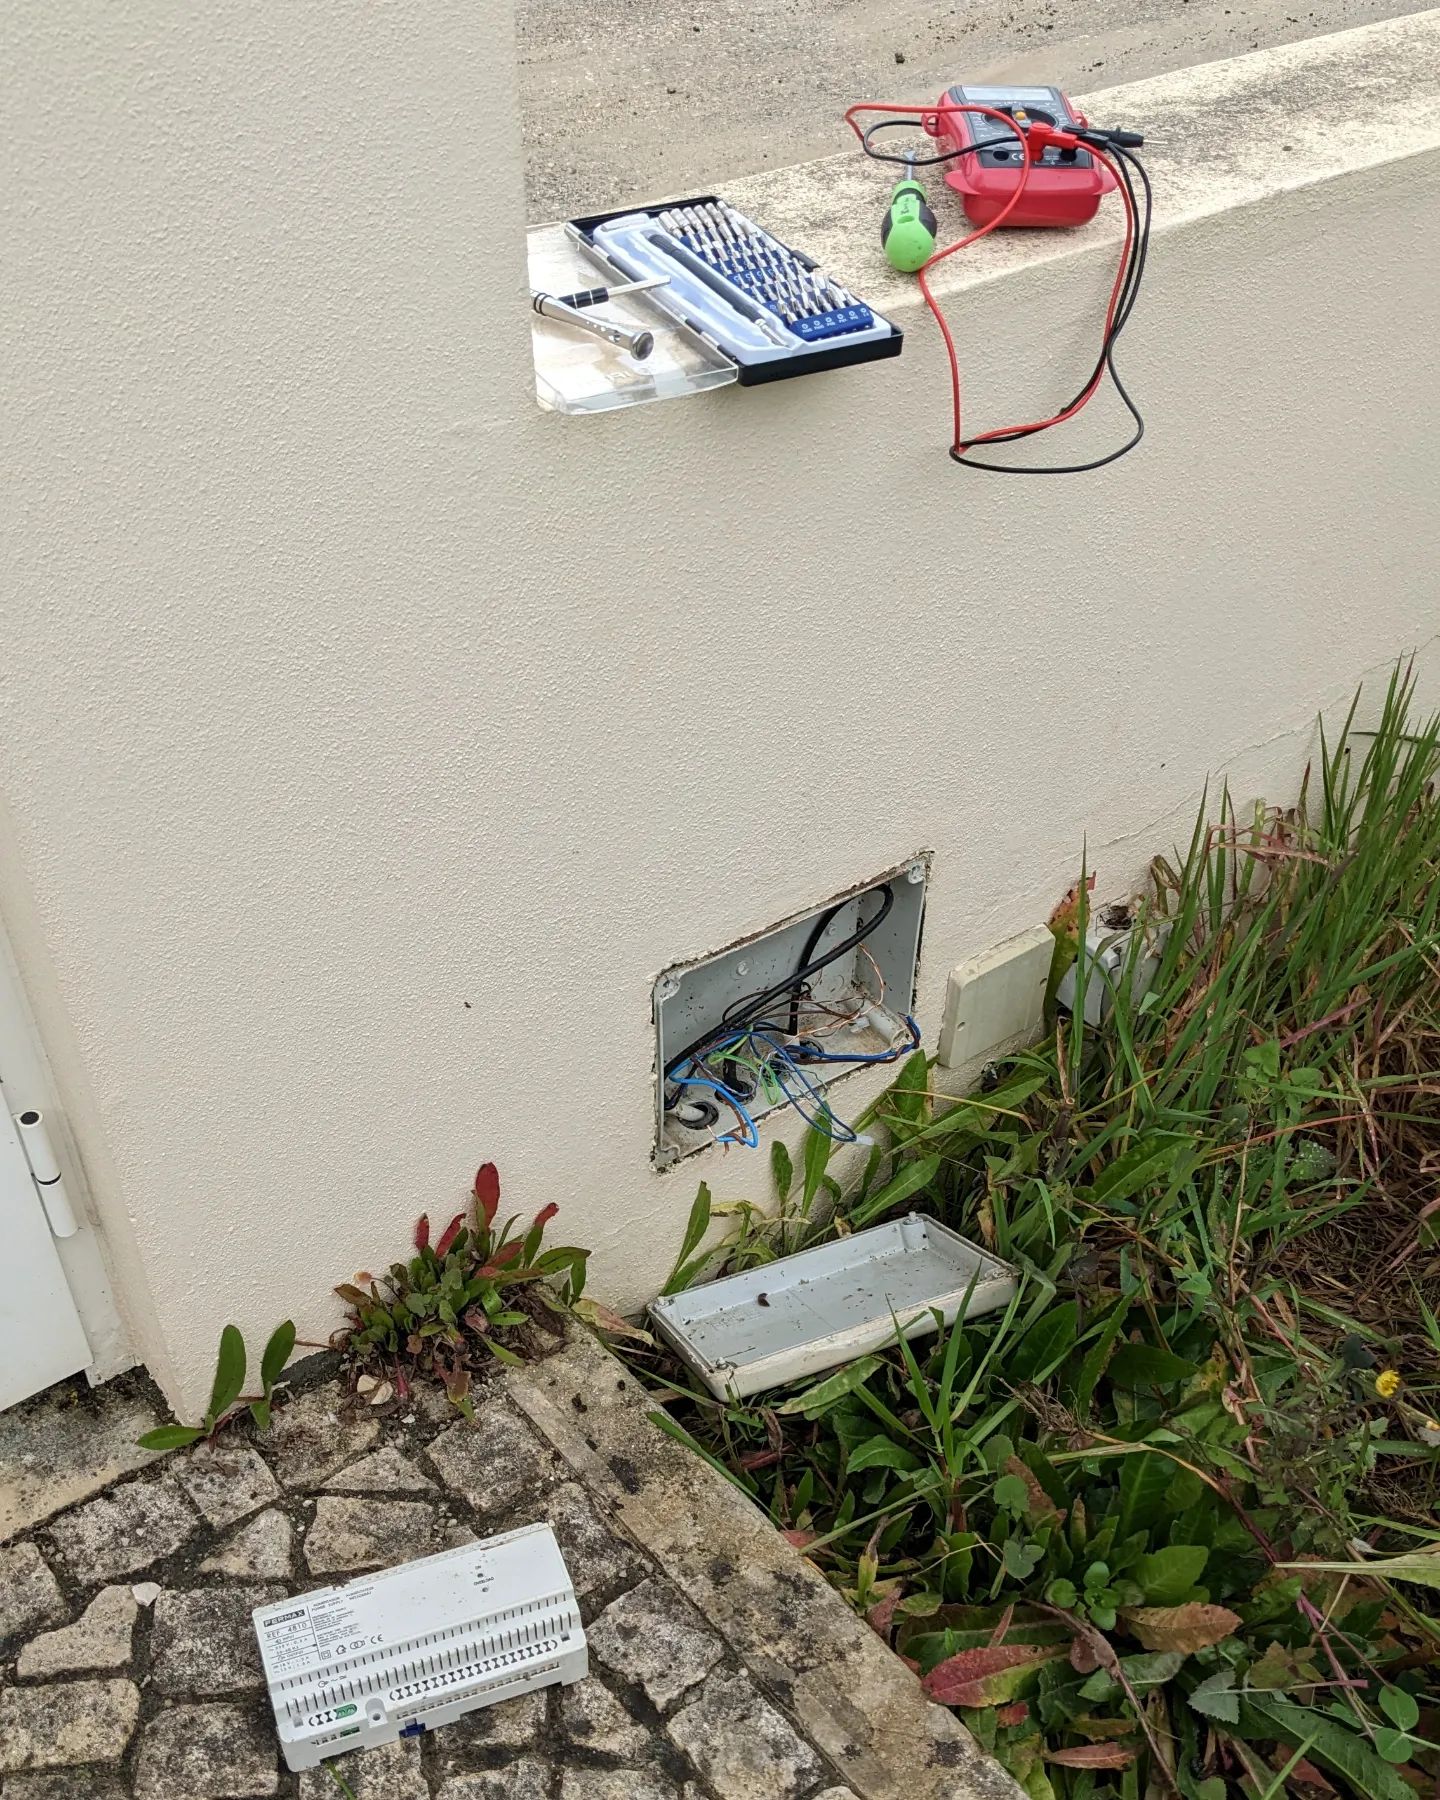 Trying to fix the doorbell